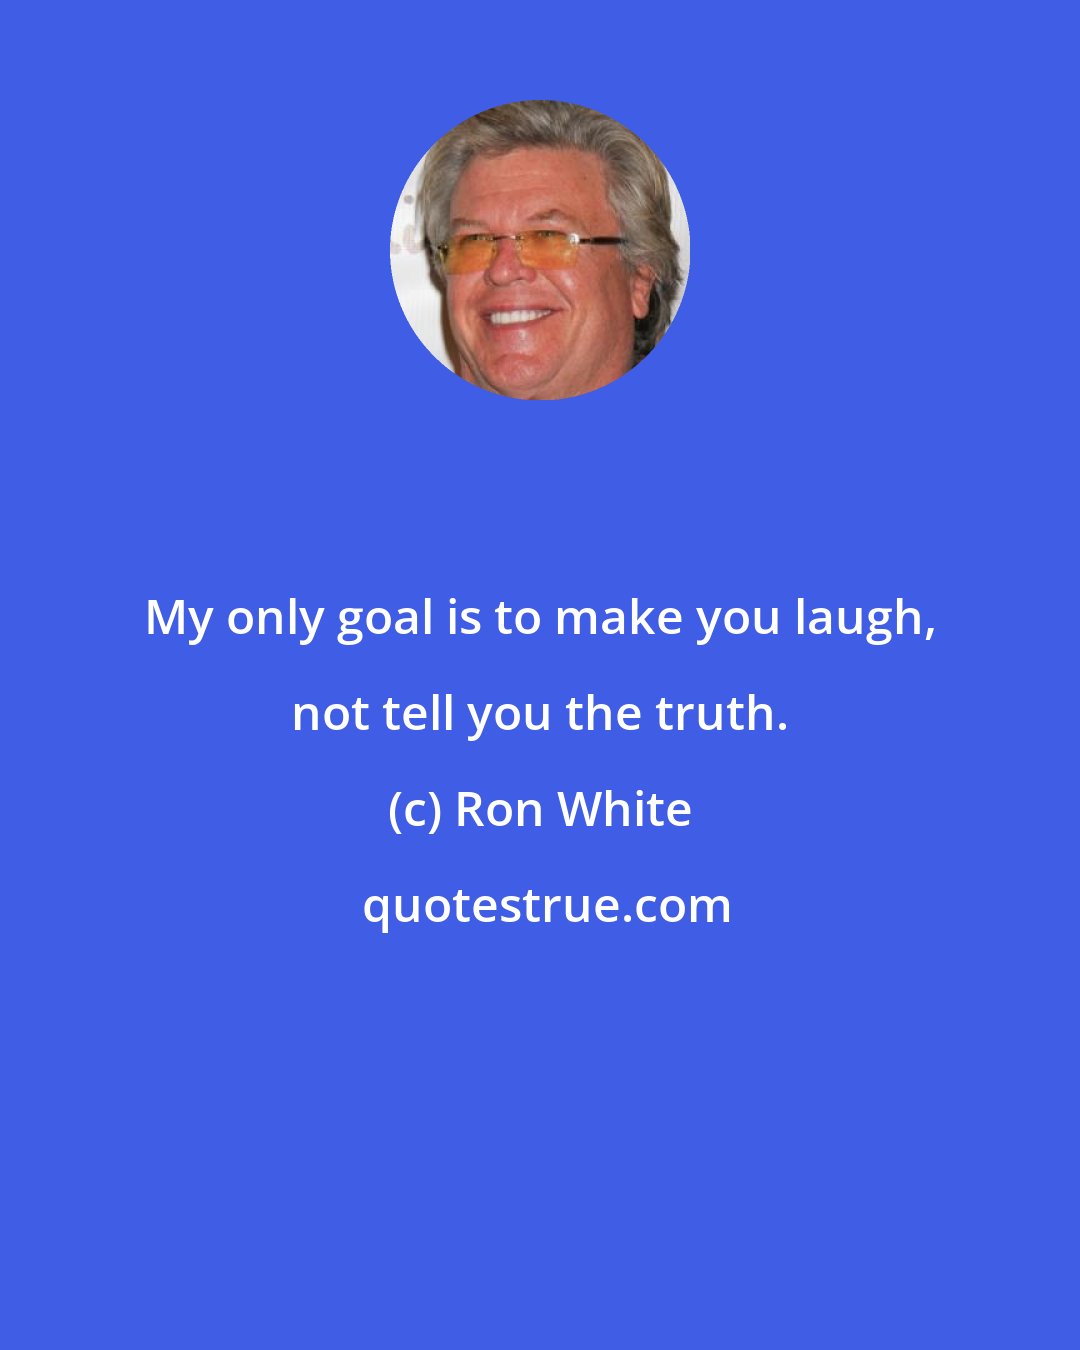 Ron White: My only goal is to make you laugh, not tell you the truth.